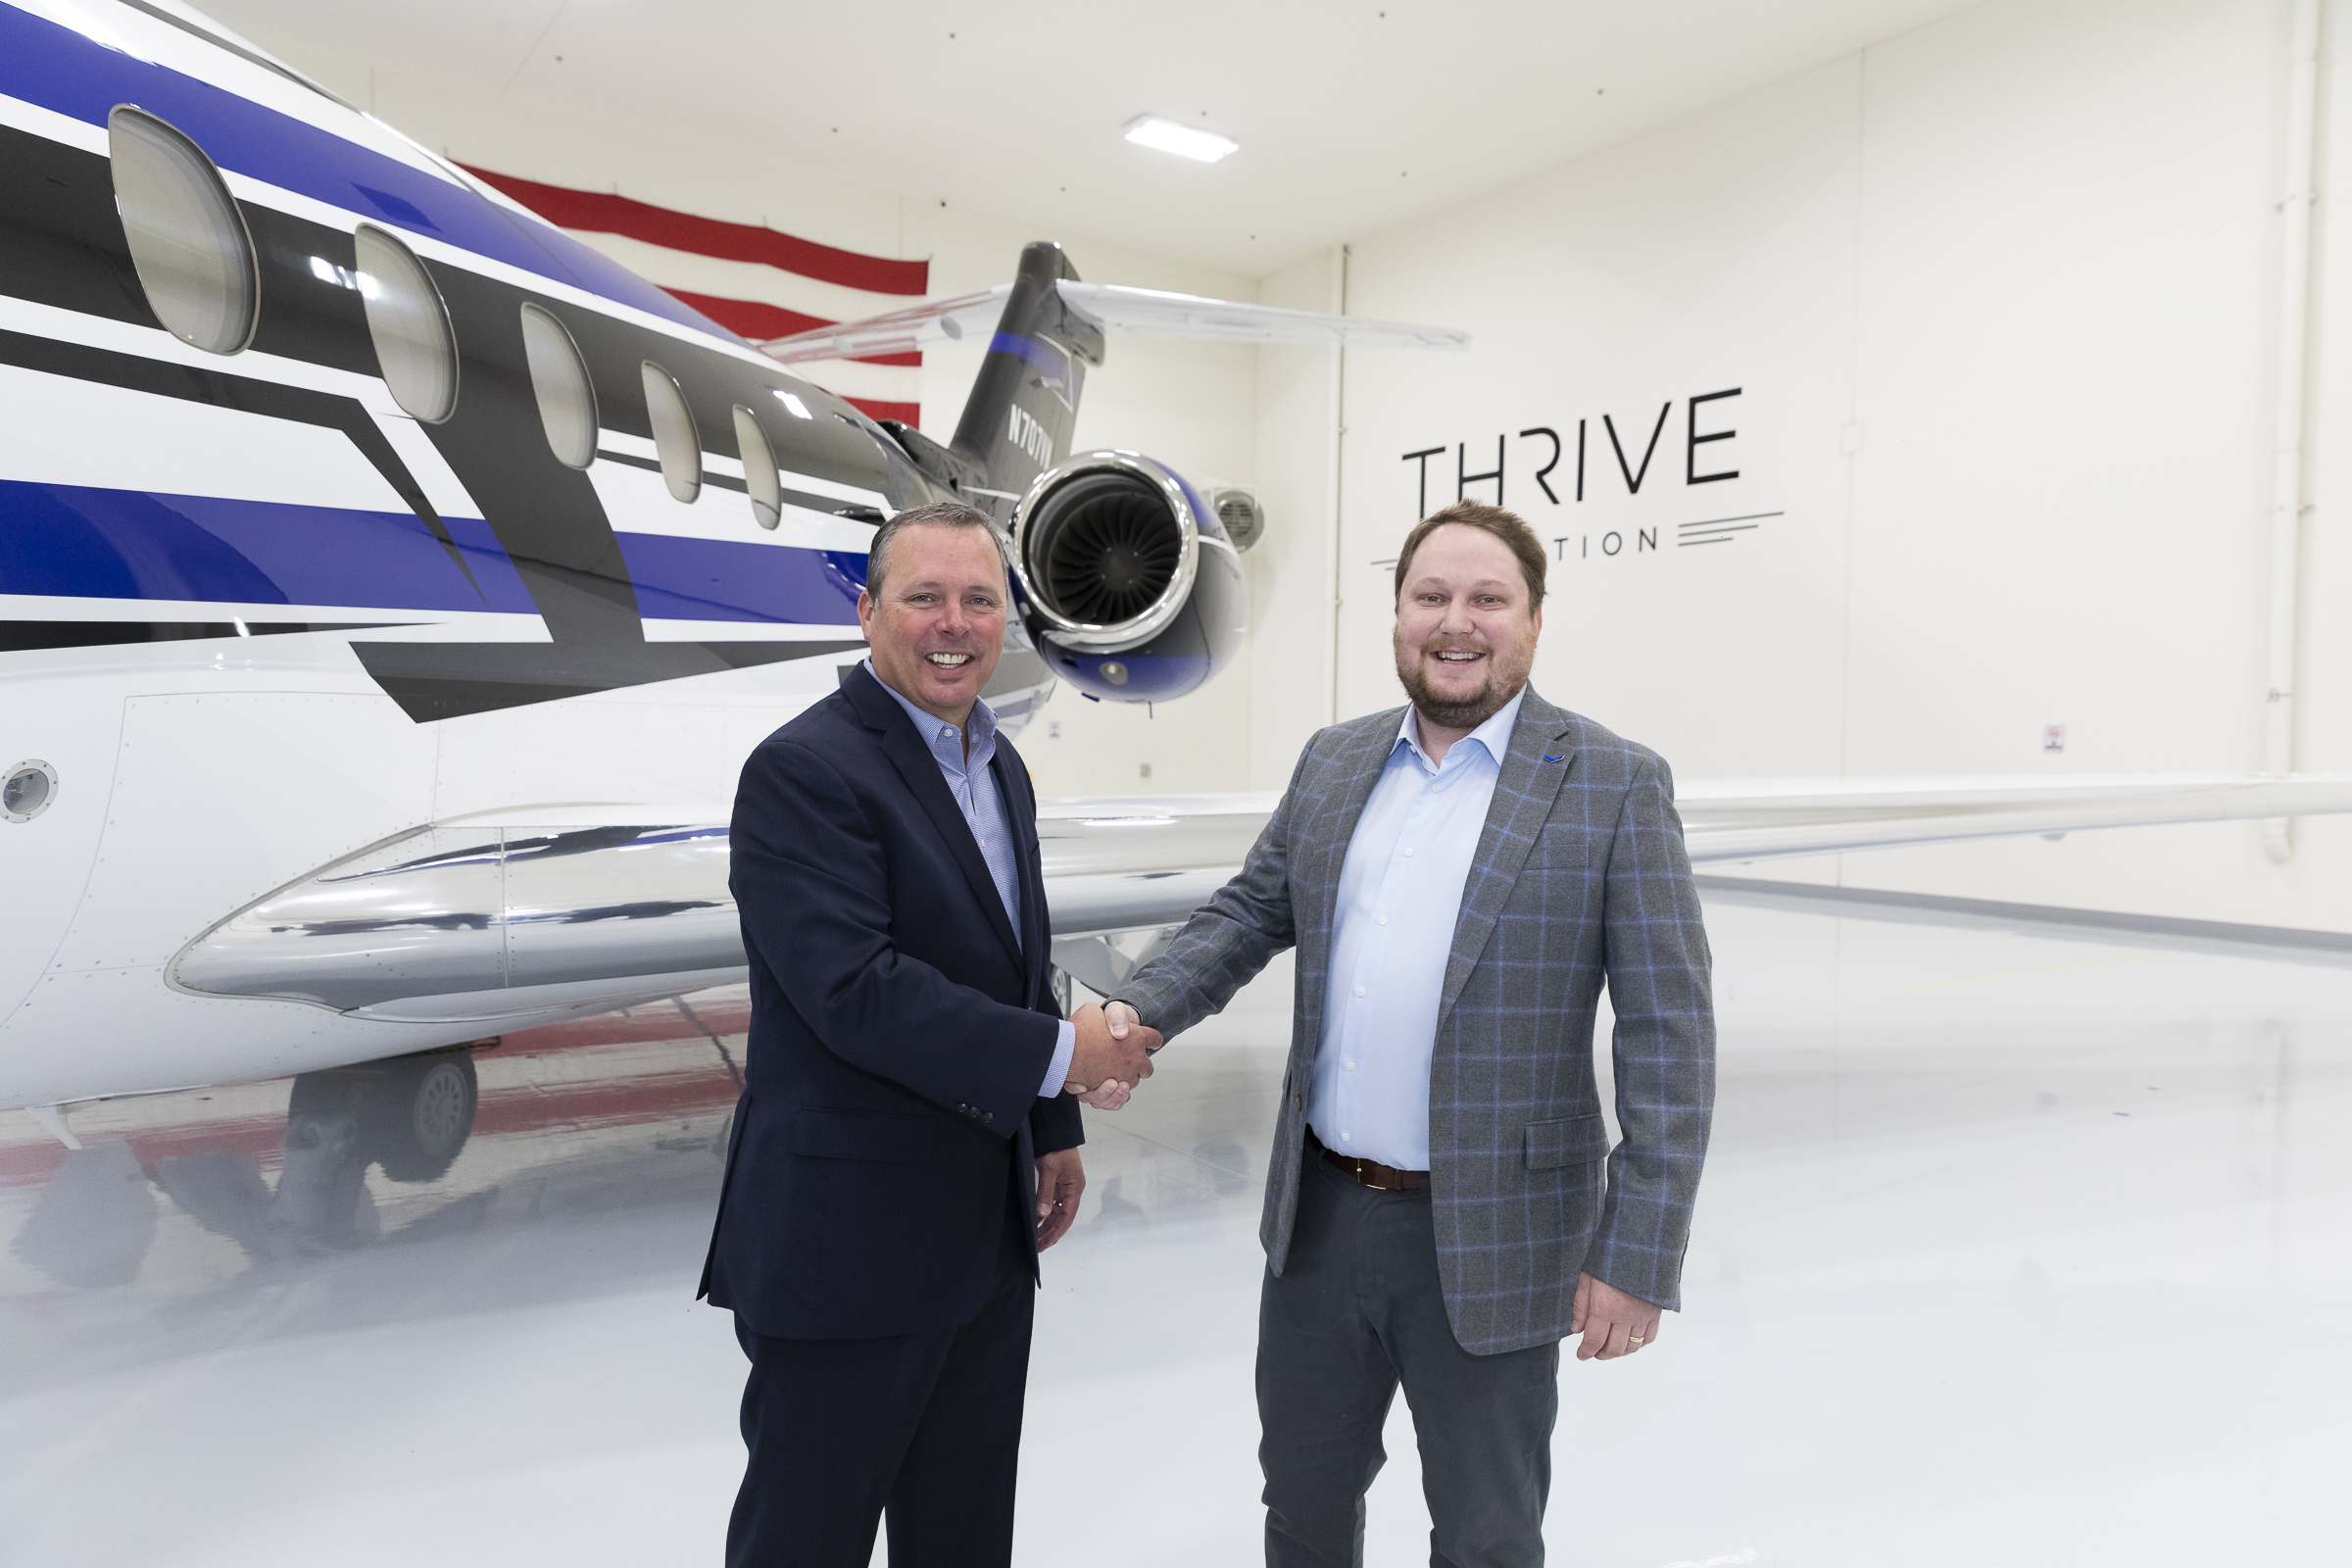 JumpSeat: One More Service Bringing Private Jet Flights to the Rest of Us